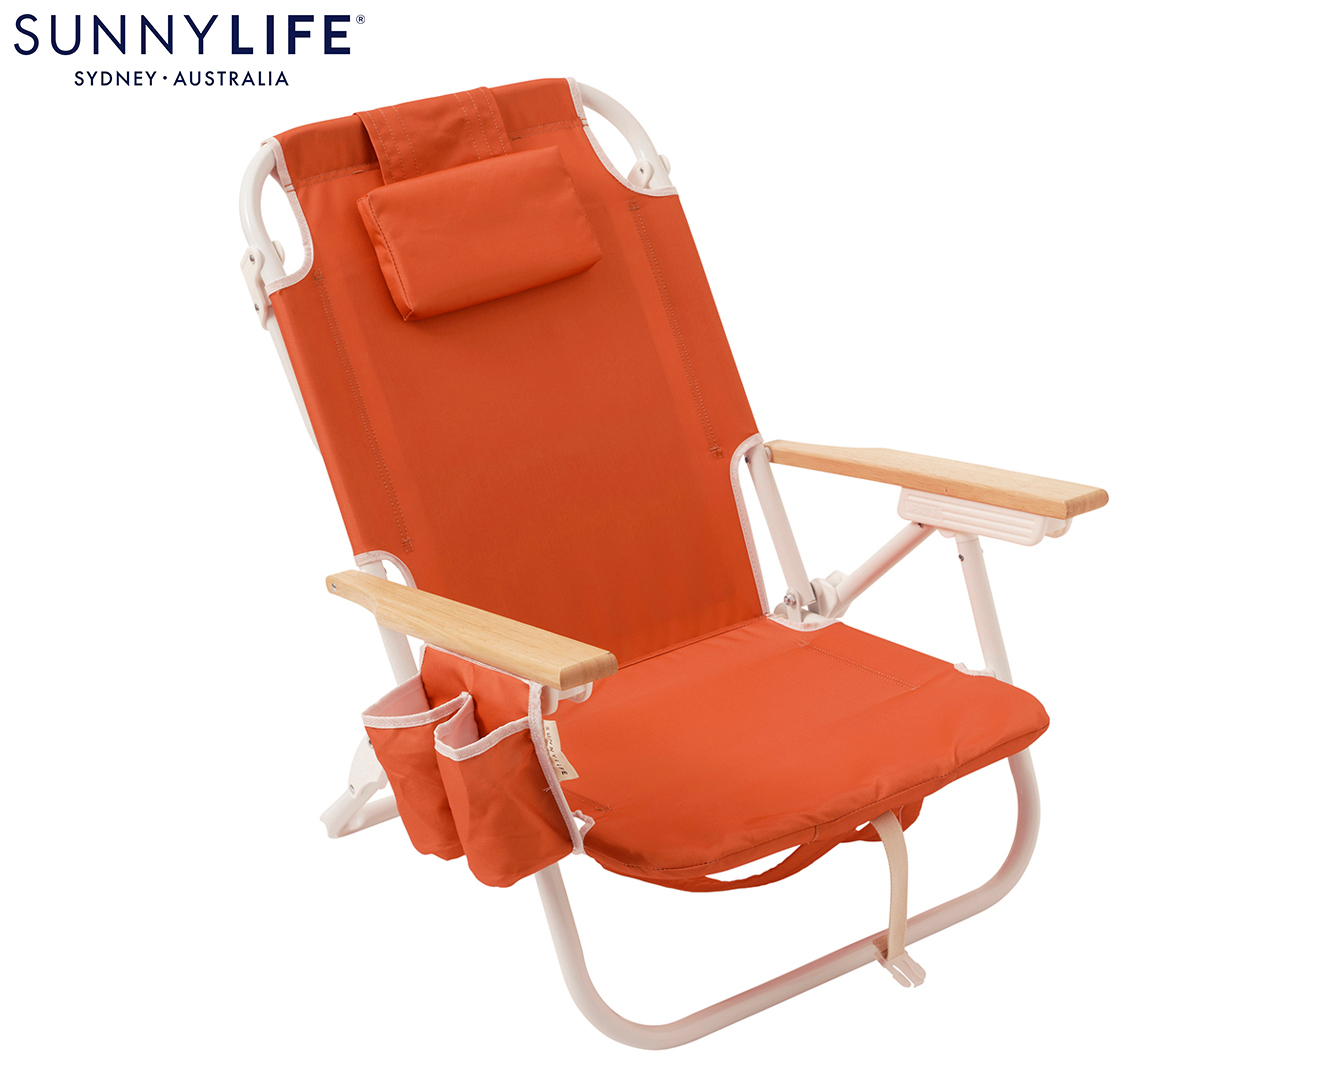 Sunnylife Deluxe Beach Chair - Red | Catch.co.nz